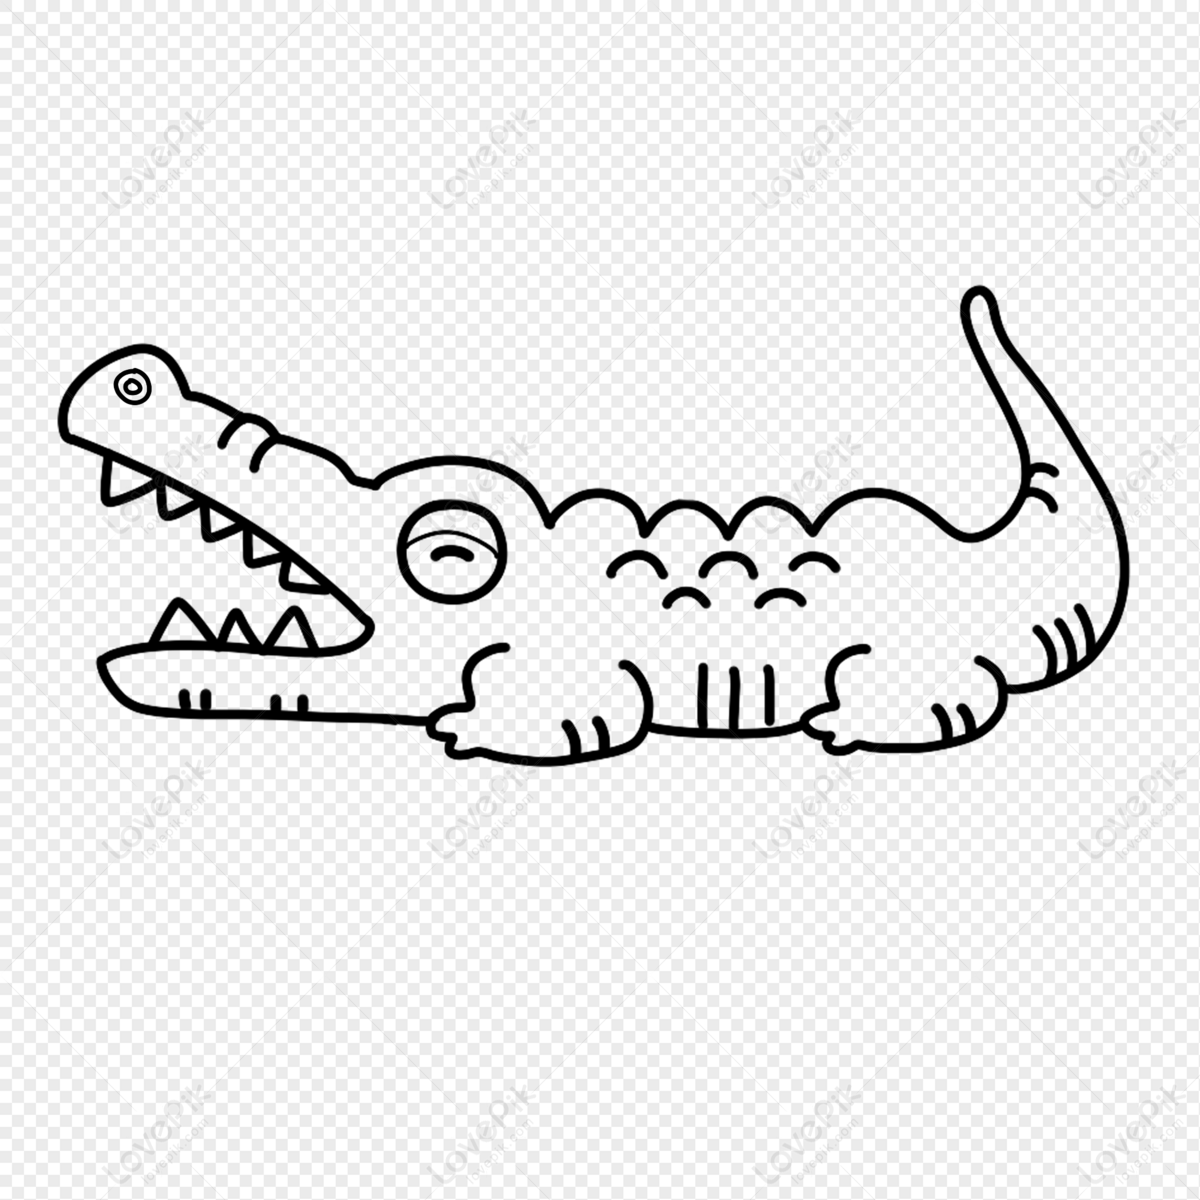 Crocodile Stick Figure Lineart PNG Transparent And Clipart Image For Free  Download - Lovepik | 401690106